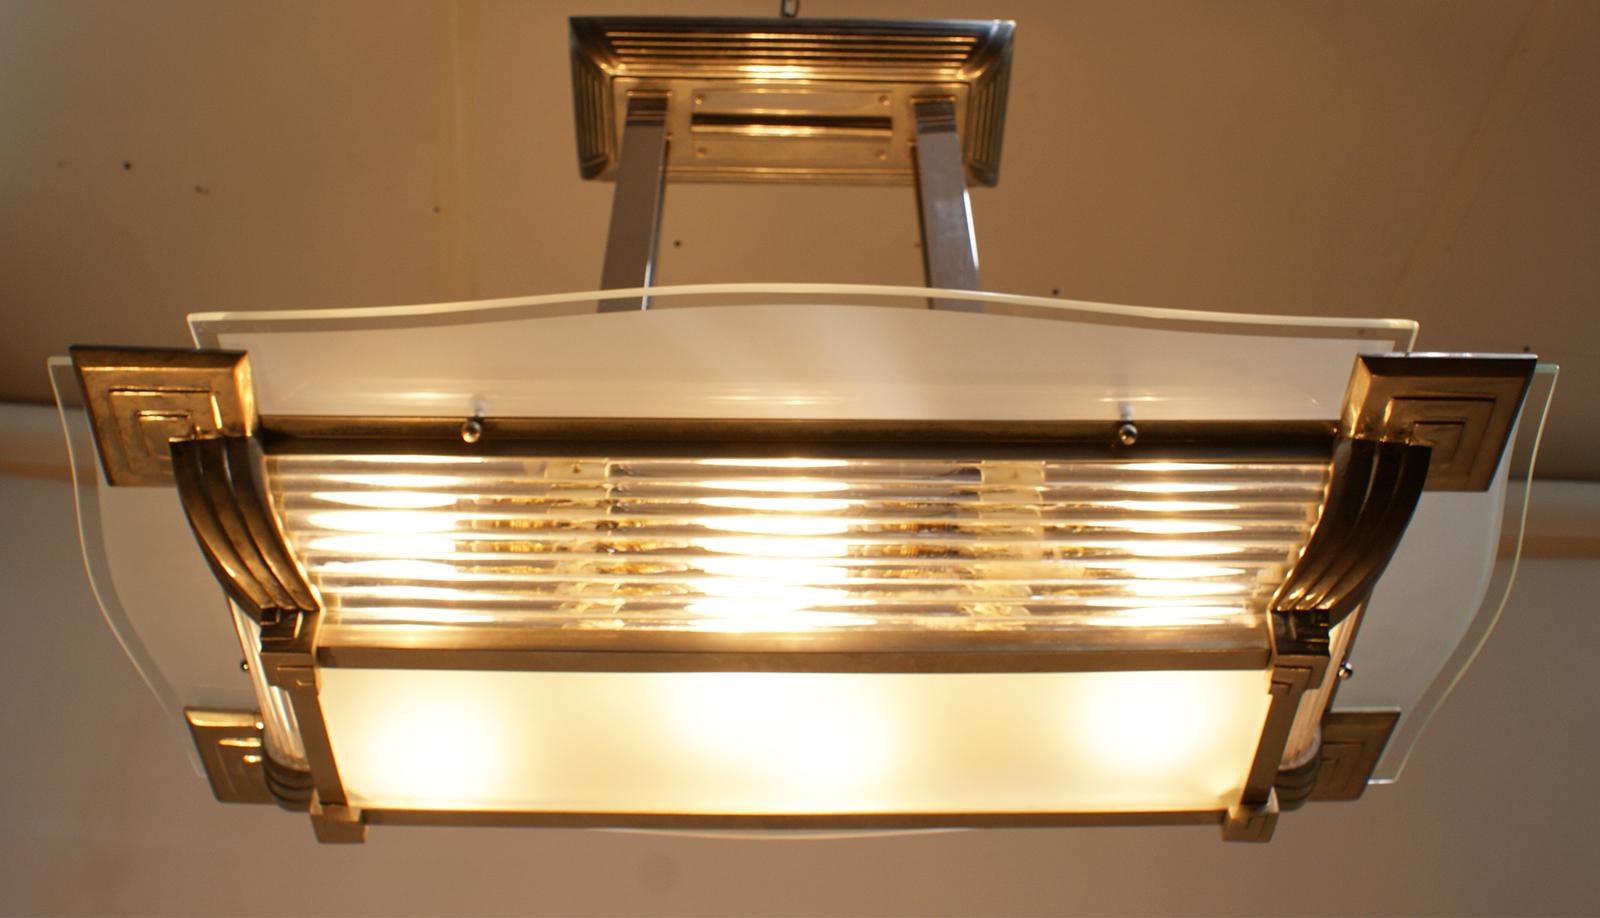 Large rectangular modernist chandelier with a nickel-plated bronze structure and glass tubes, typical of the Art Deco period.
   